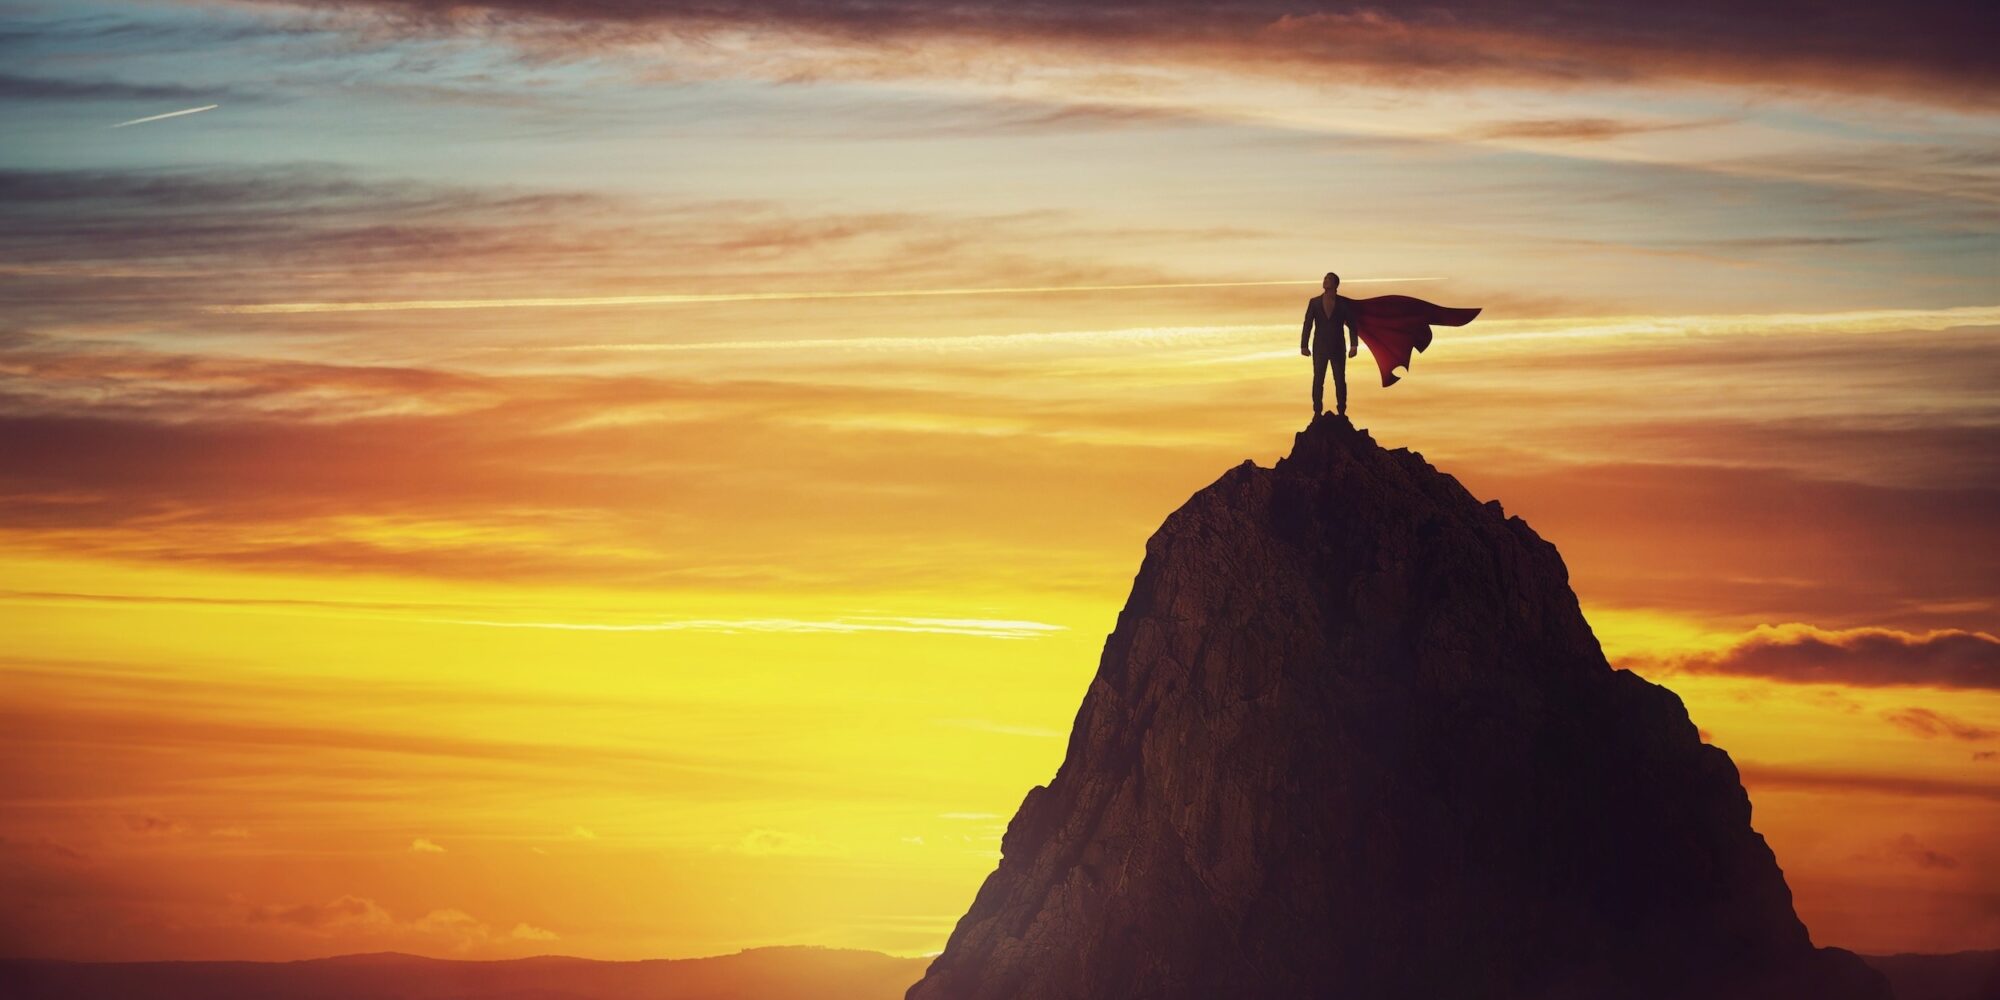 Businessman superhero conceptual scene. Determined hero with red cape stands brave on a mountain peak. Business leadership, ambition and strength metaphor. Overcome obstacles and achieve success